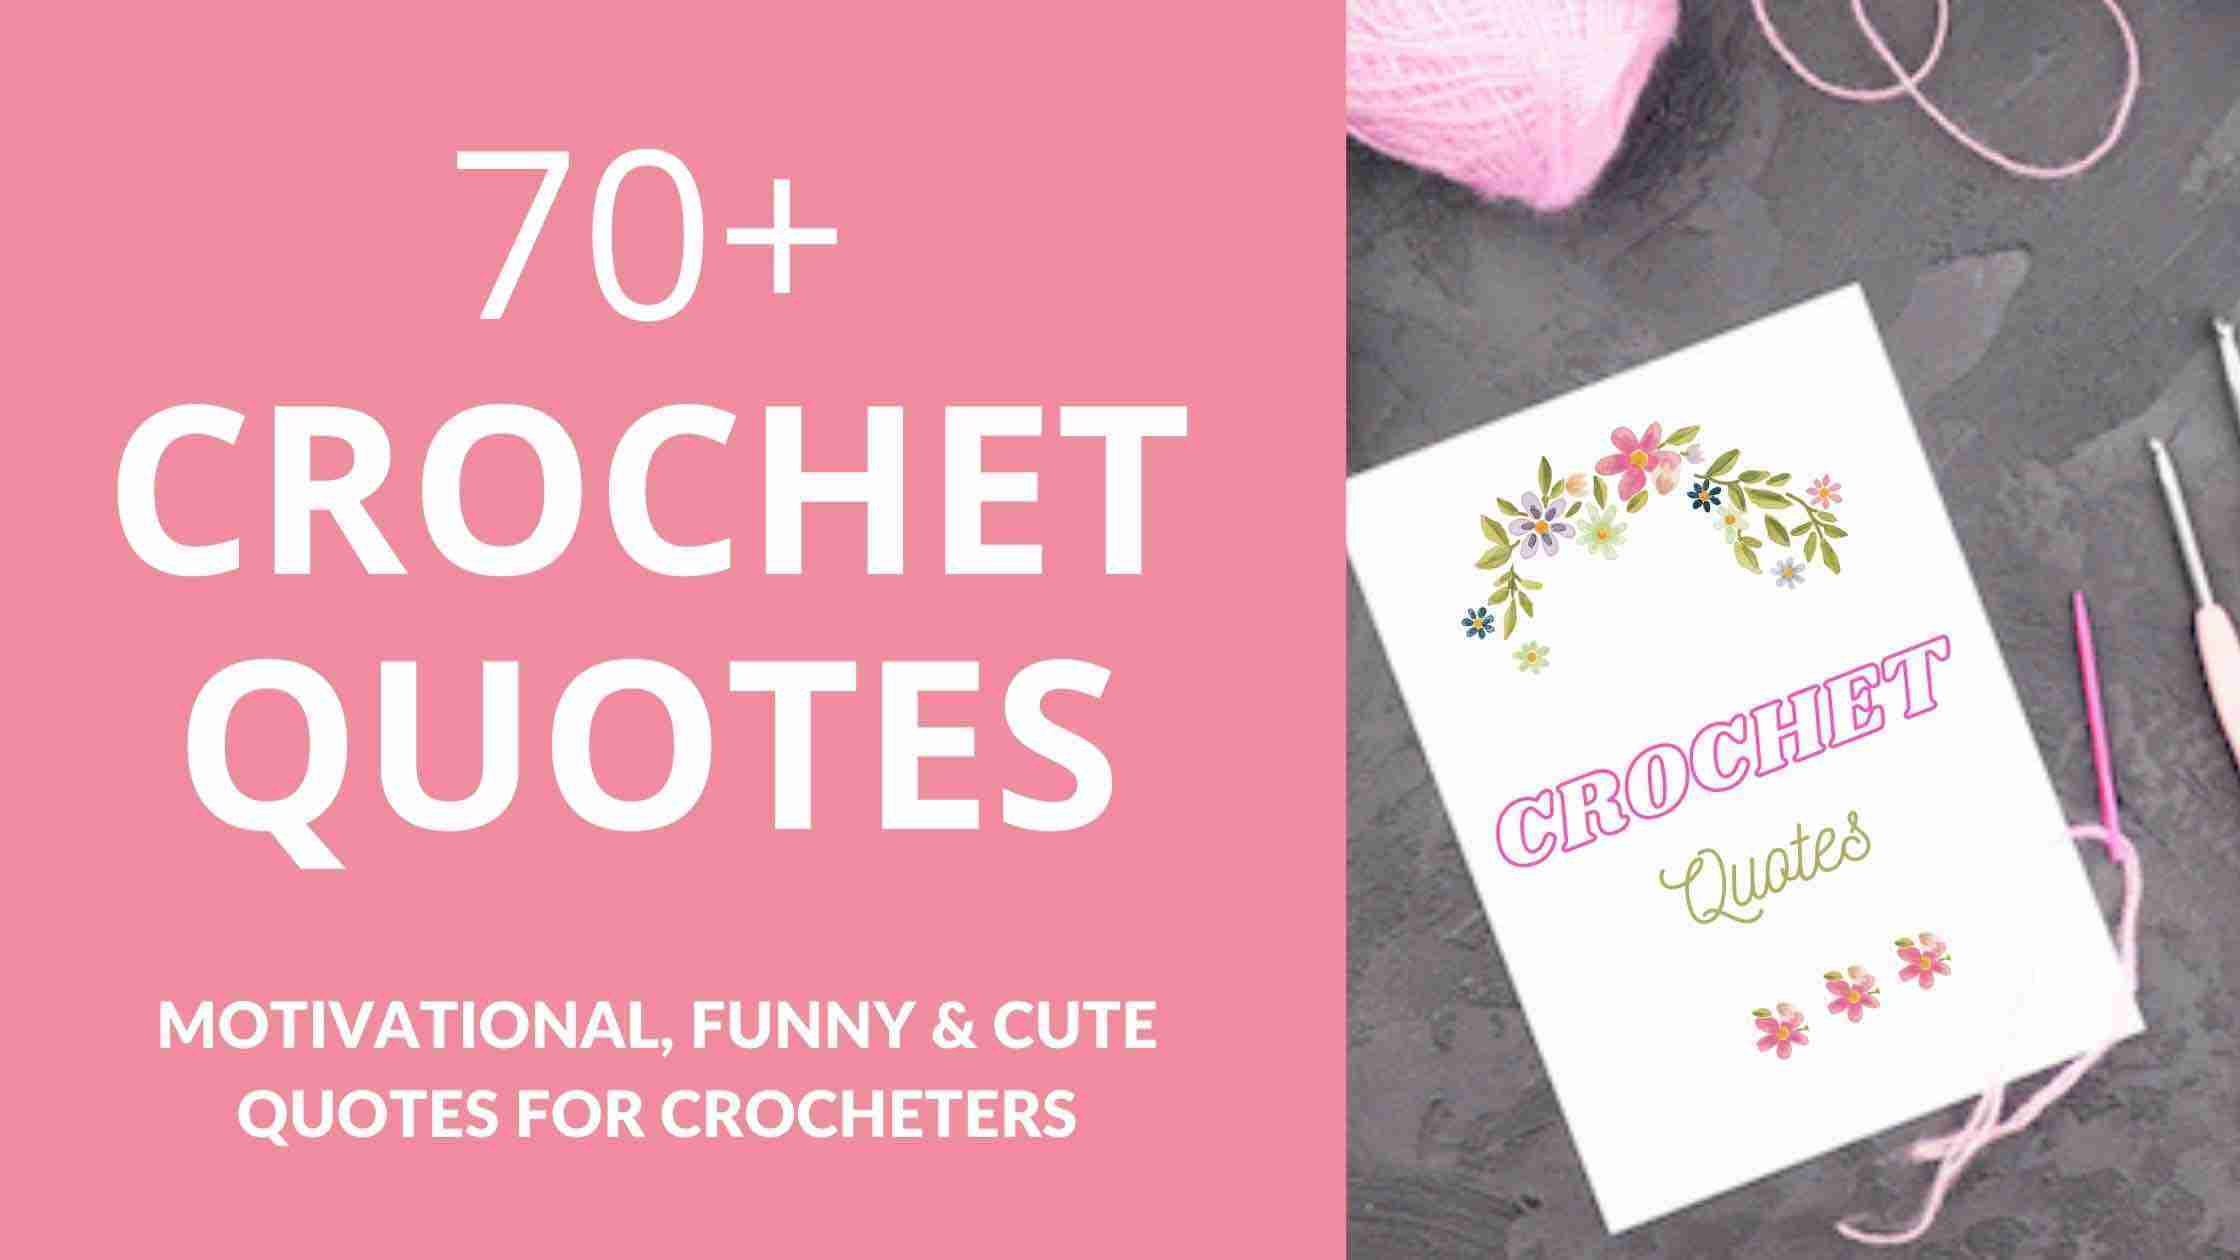 70+ Crochet Quotes: Motivational, Funny & Cute Quotes For Crocheters -  Start Crochet